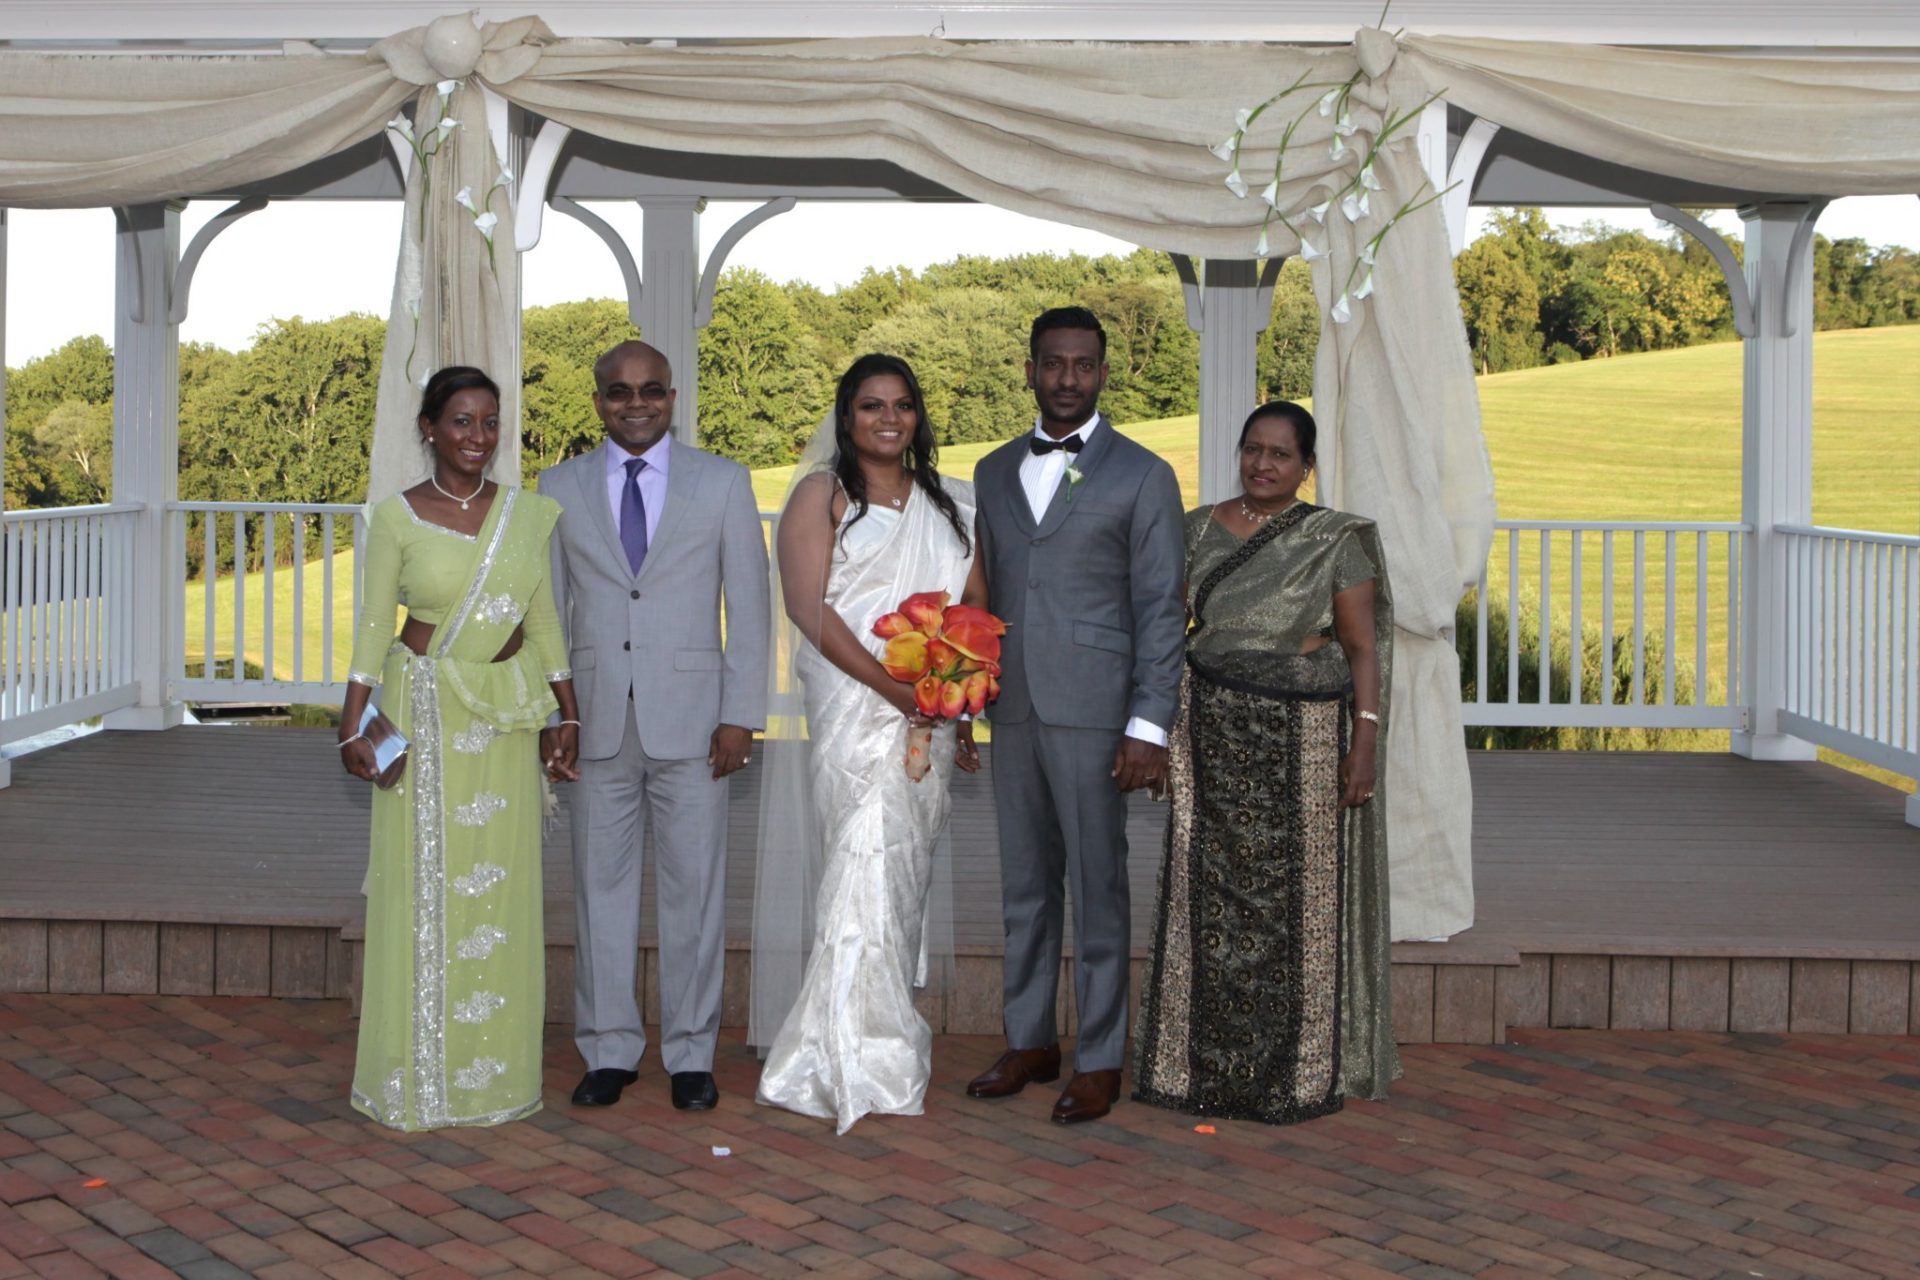 Family photograph in front of wedding pavilion